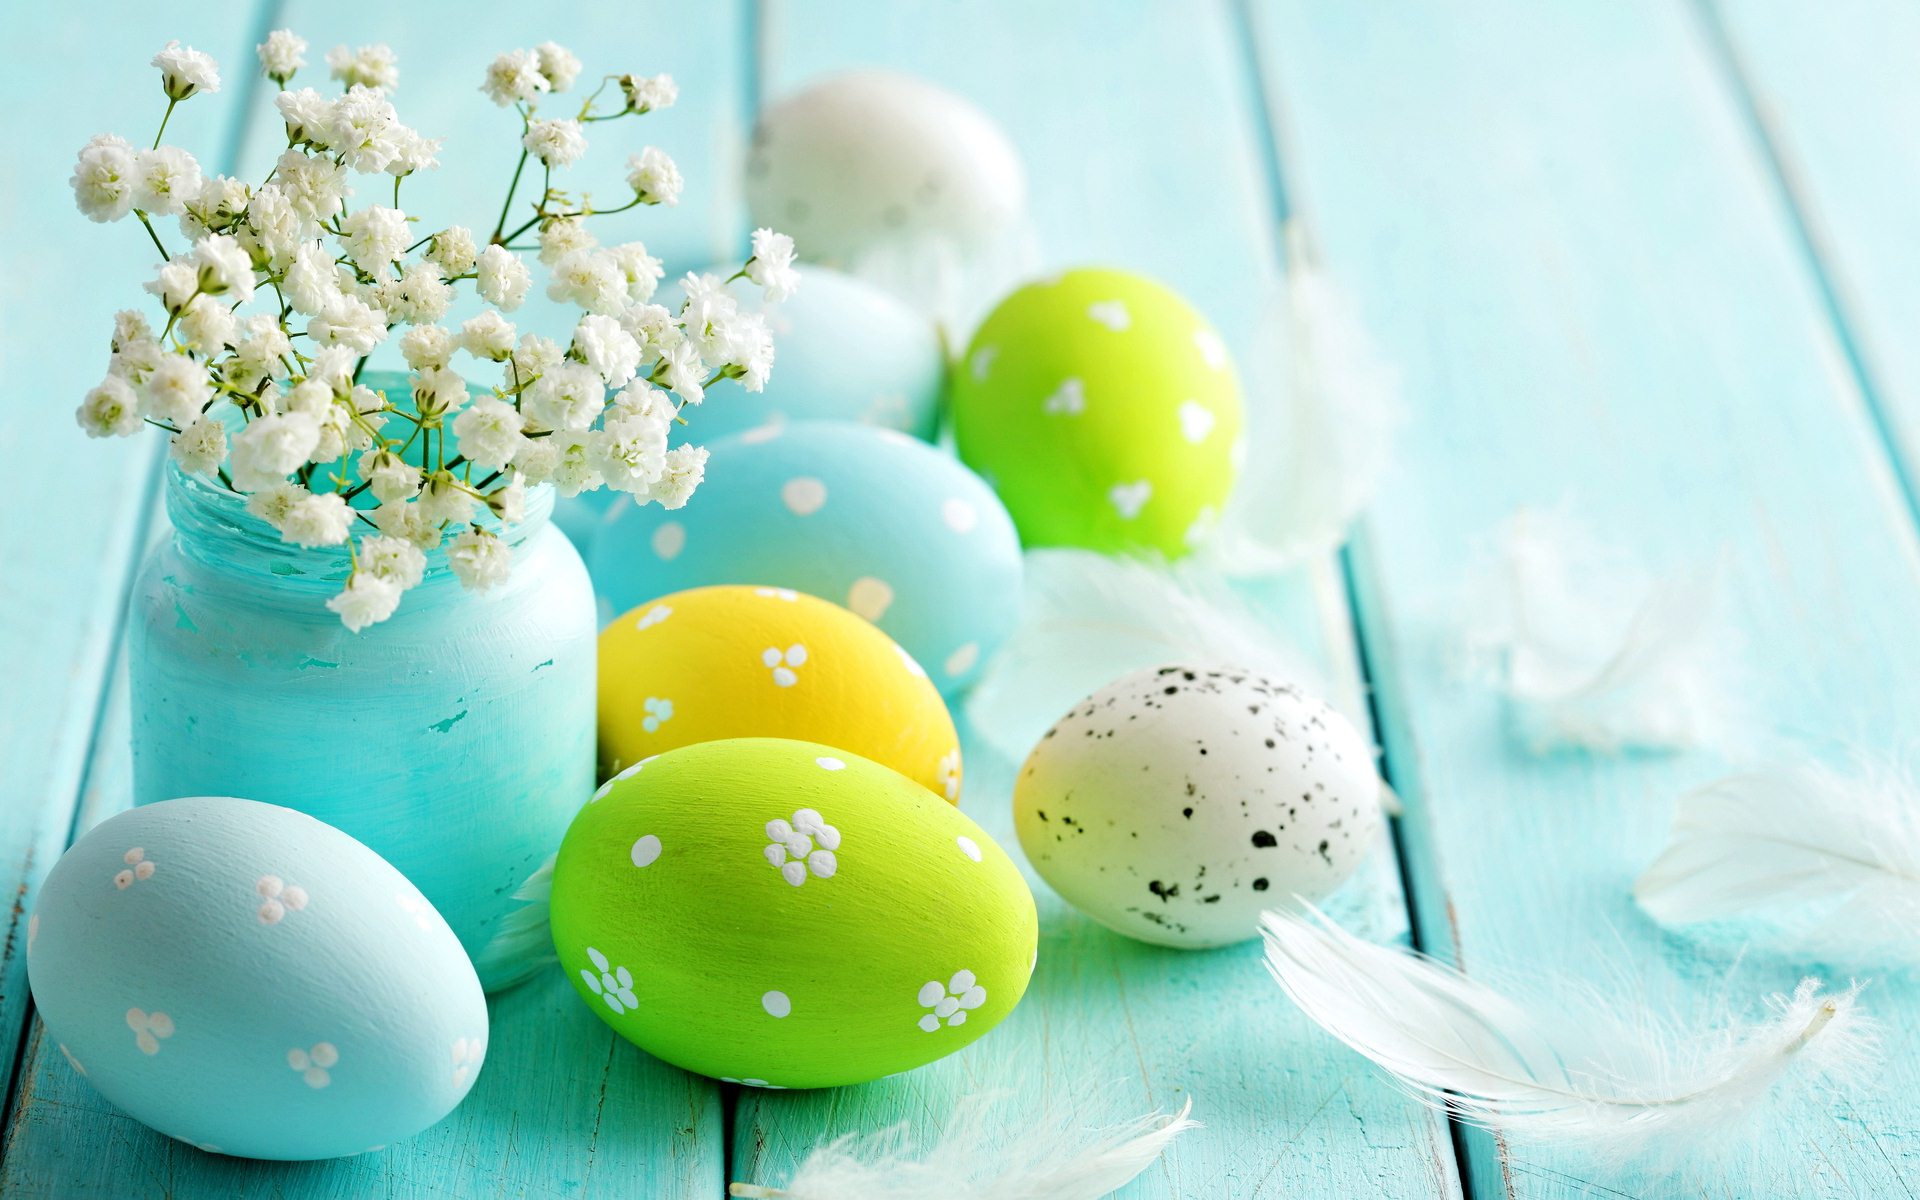 Easter Wallpaper HD Colletion